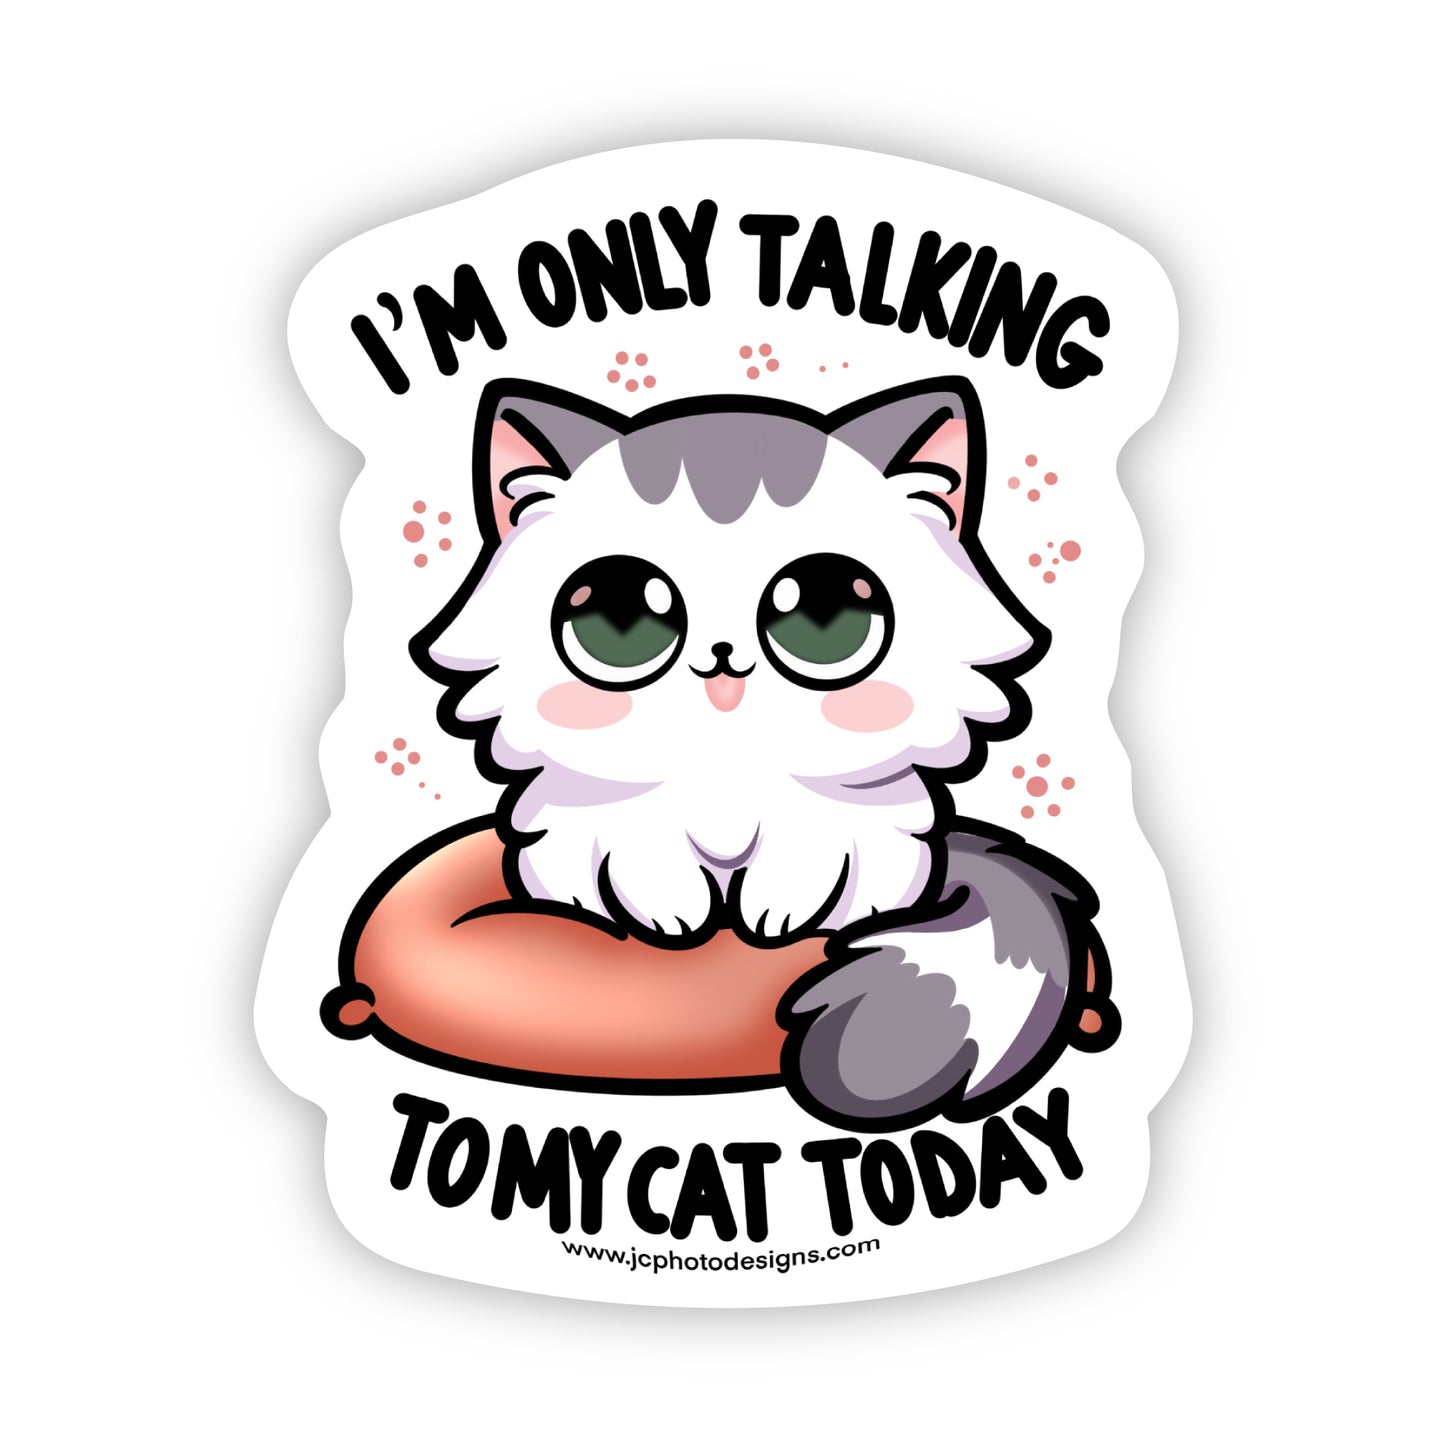 'I'm Only Talking to my Cat Today' - Cute Cat Sticker